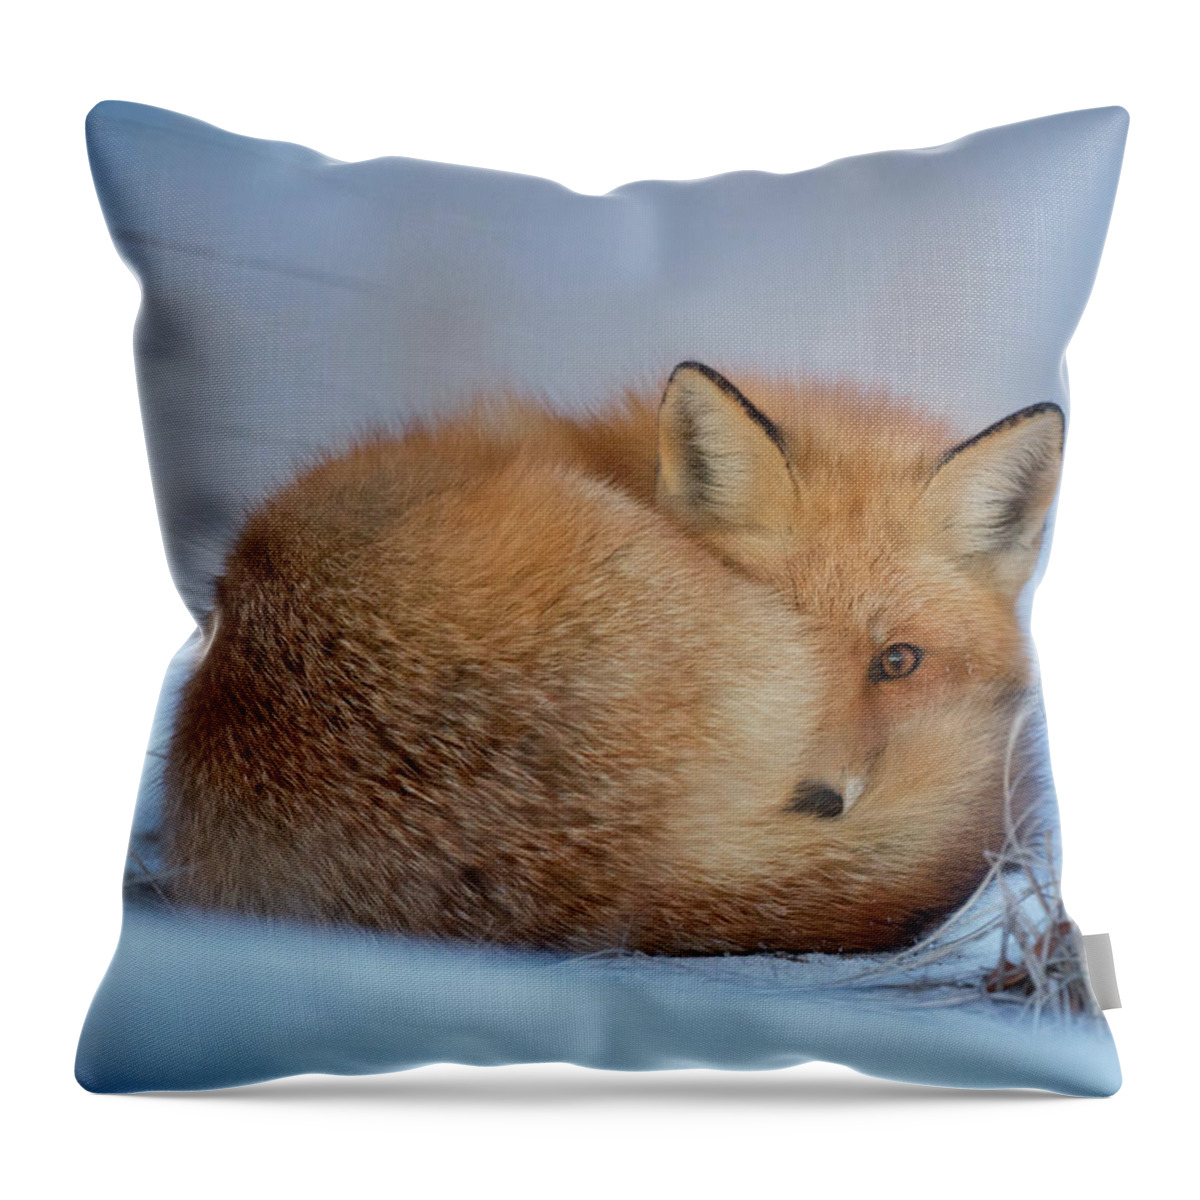 Fox In Snow Throw Pillow featuring the photograph Curled Up Fox by World Art Collective